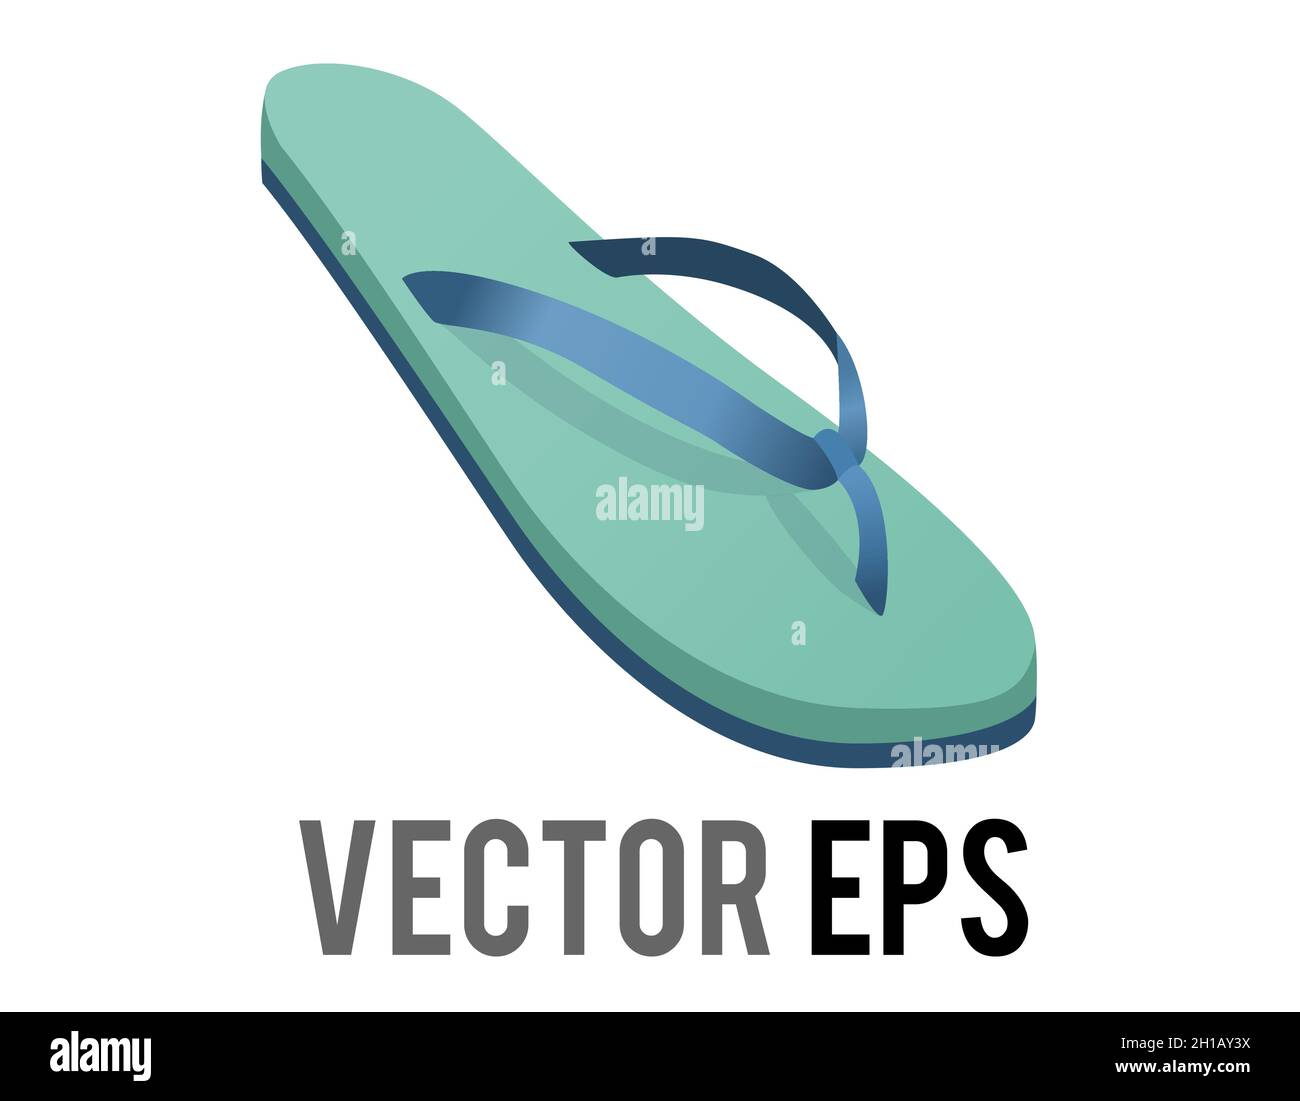 The isolated vector green and blue single rubber flip flop, thong sandal icon,  used to wear sandals to beach or warm weather places Stock Vector